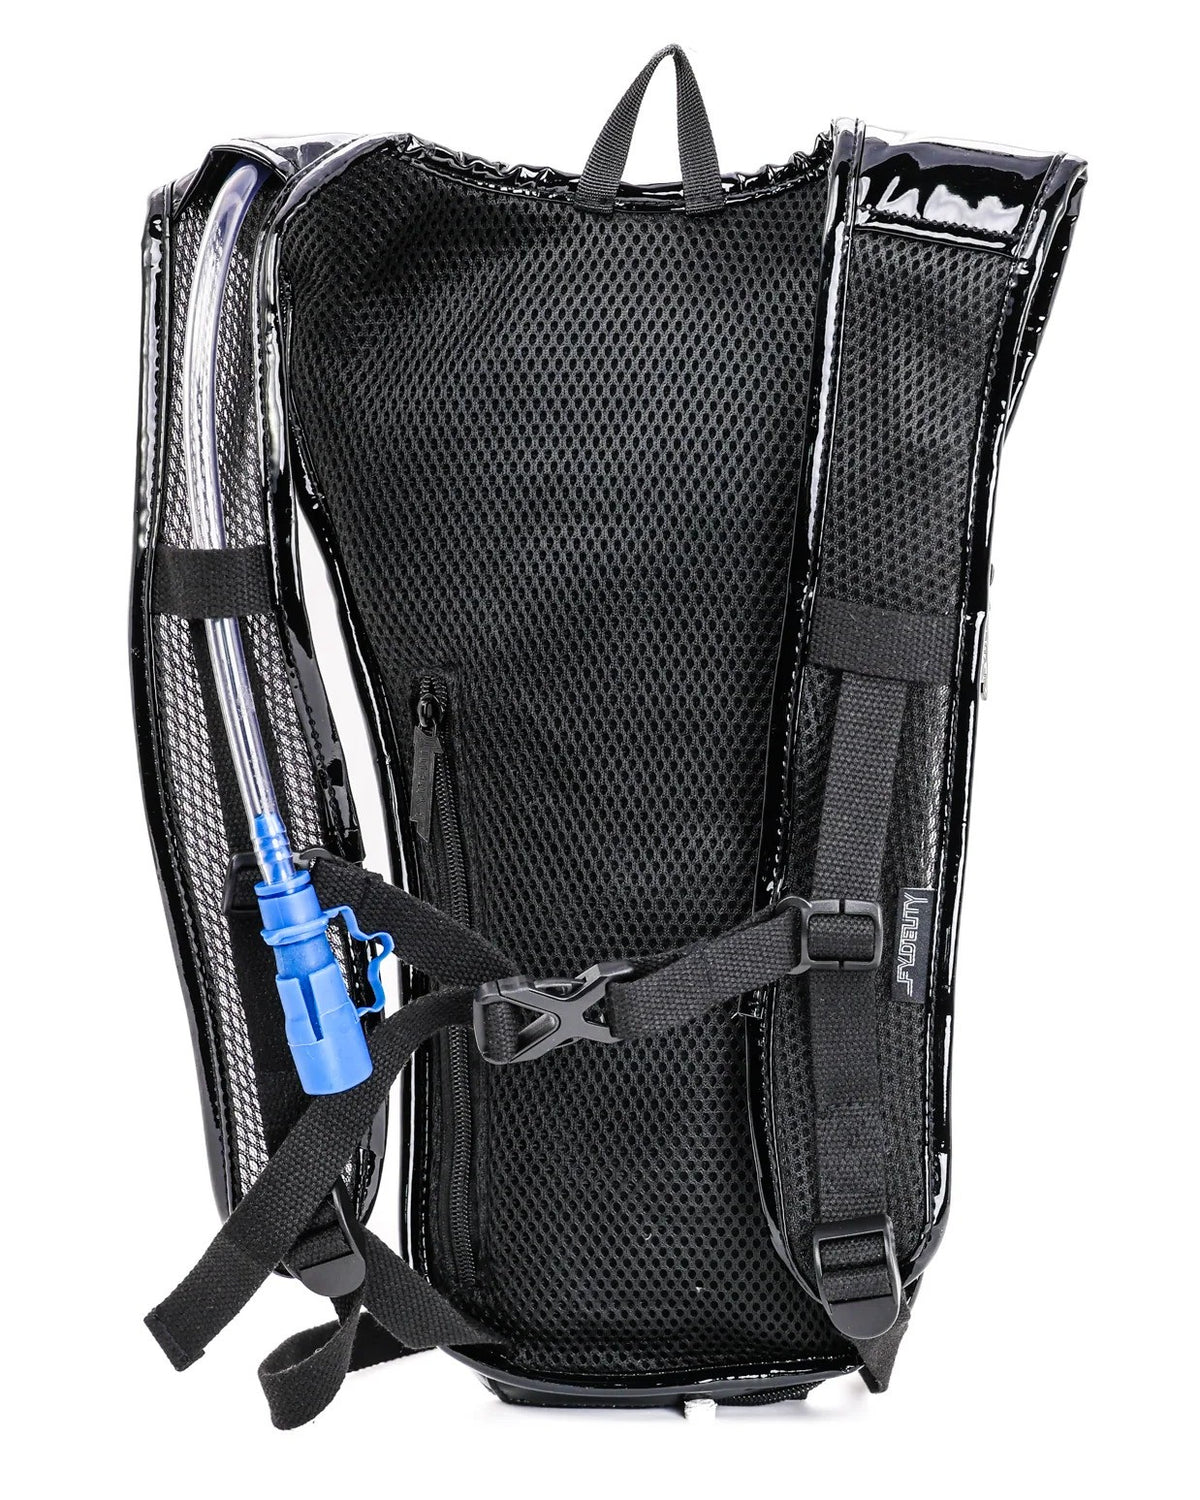 Coffin Hydration Backpack